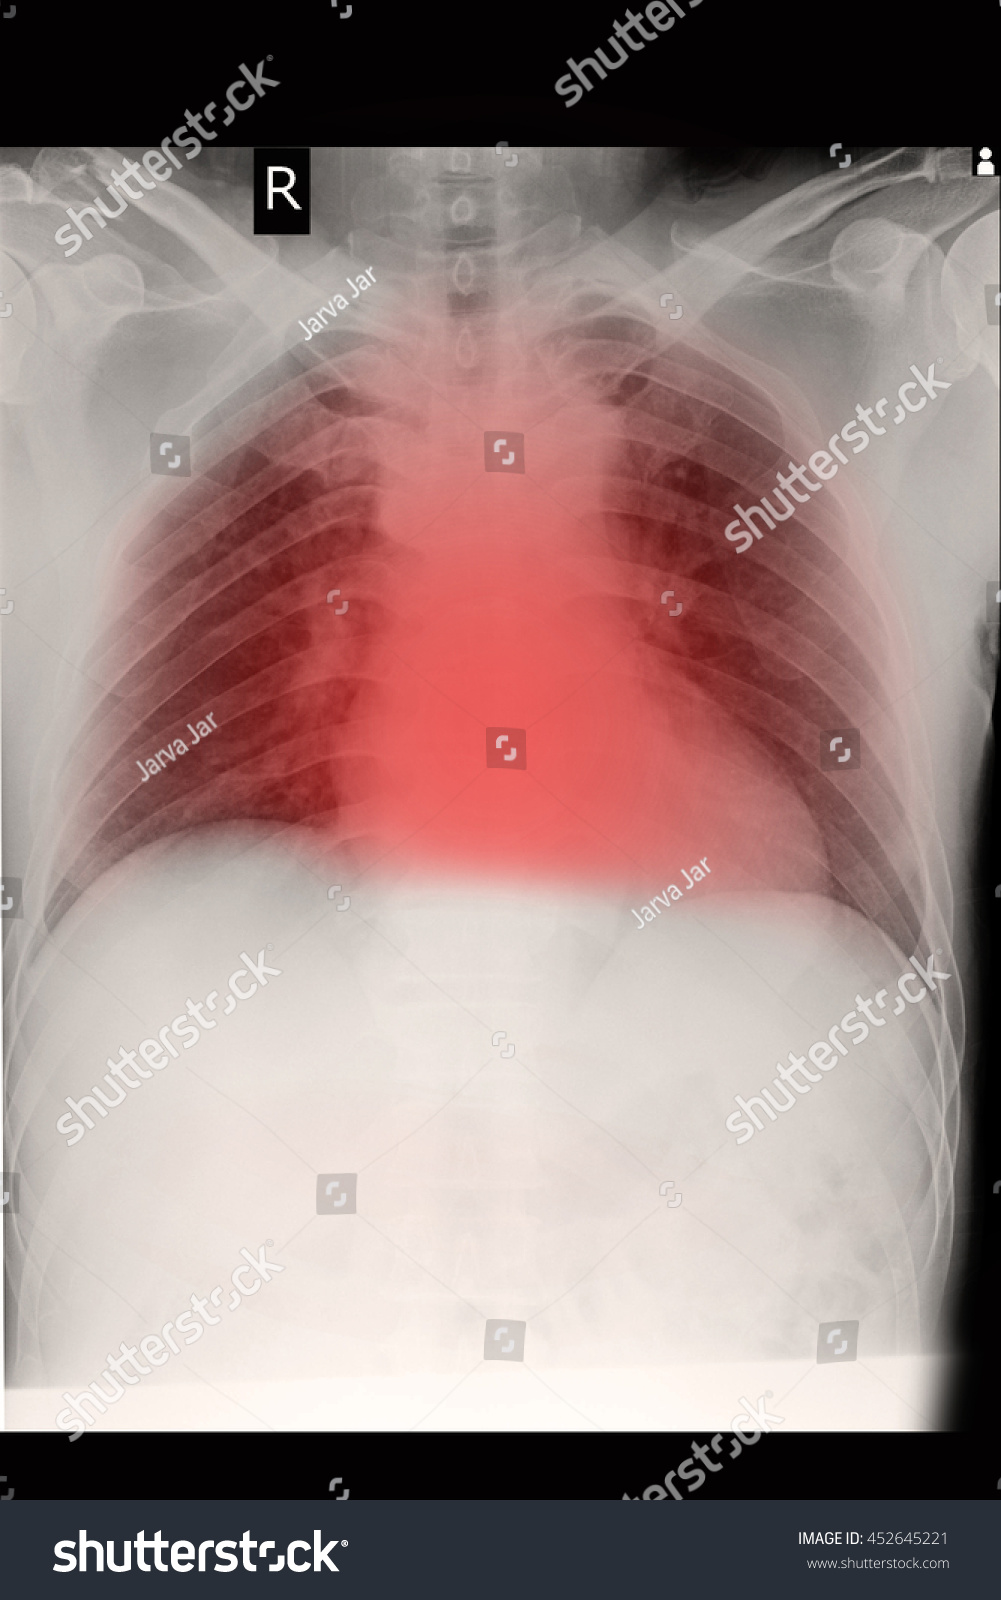 Chest Xray Show Cardiomegaly Abd Congestive Stock Photo (Edit Now ...